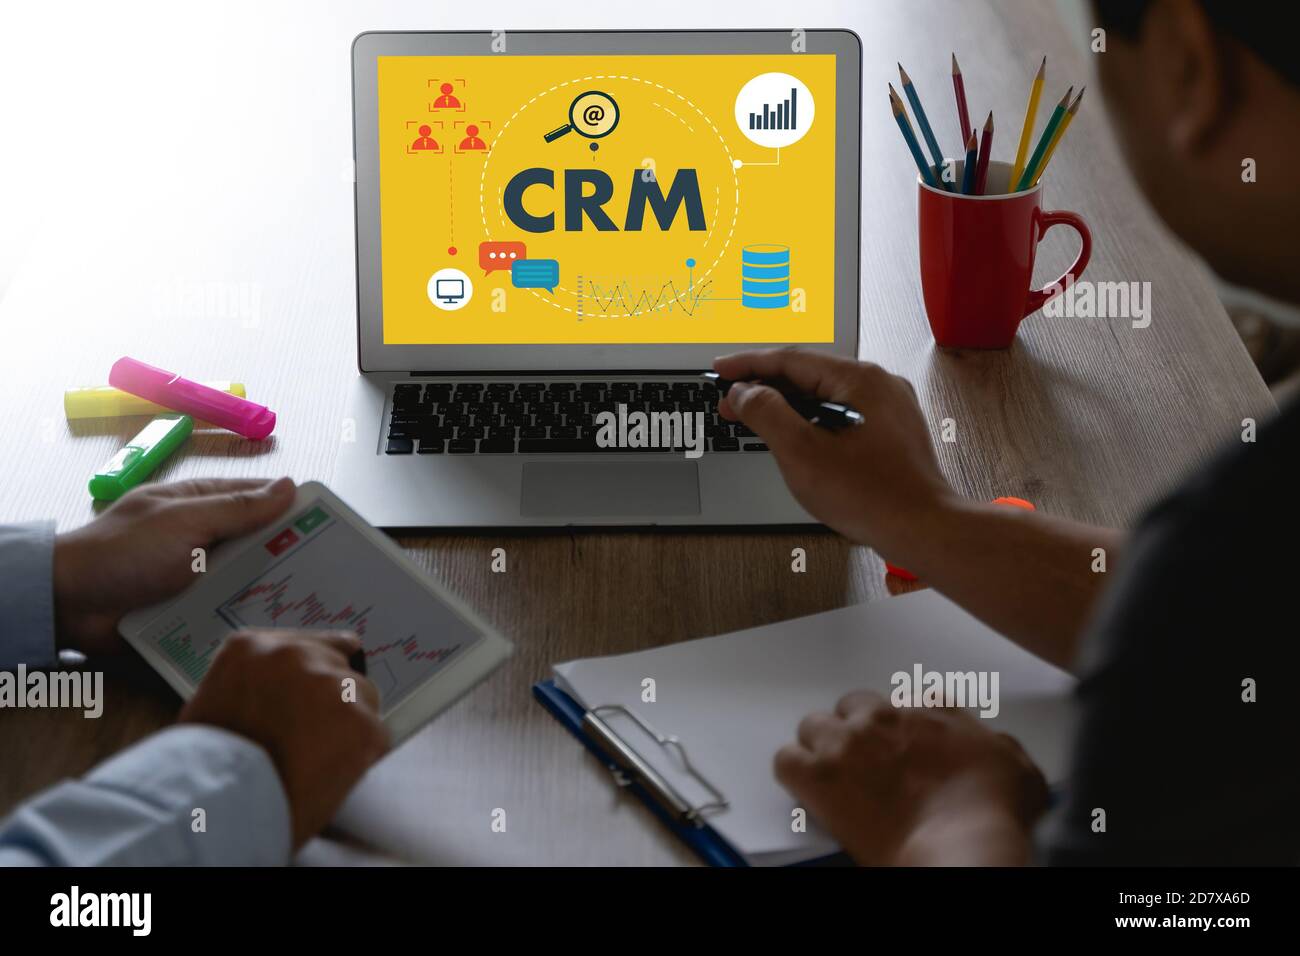 CRM Business Customer CRM Management Analysis Service Concept Business team hands at work with financial reports and a laptop Stock Photo